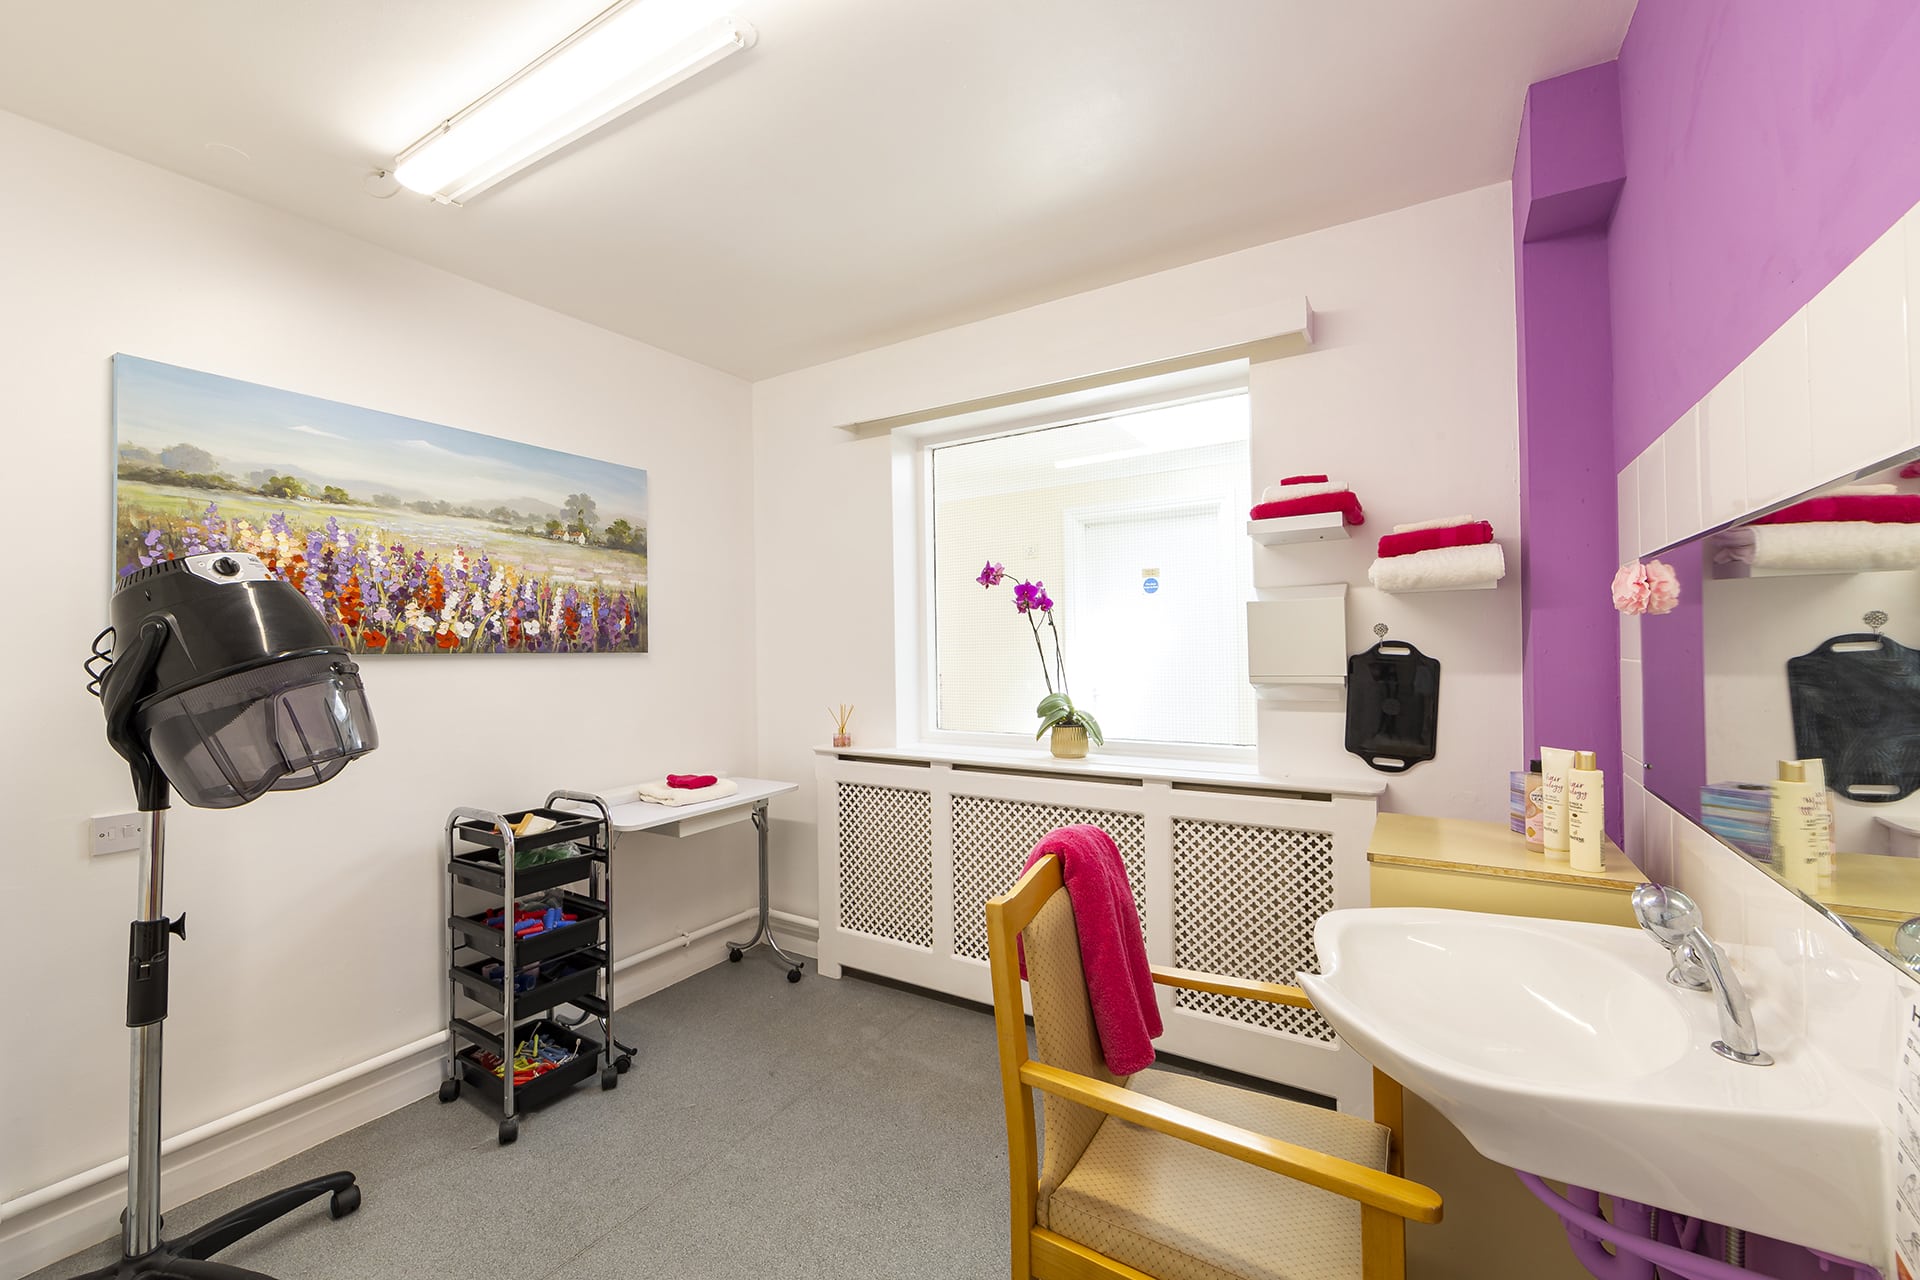 Hair salon at Cavell House Care Home in Shoreham-by-Sea.